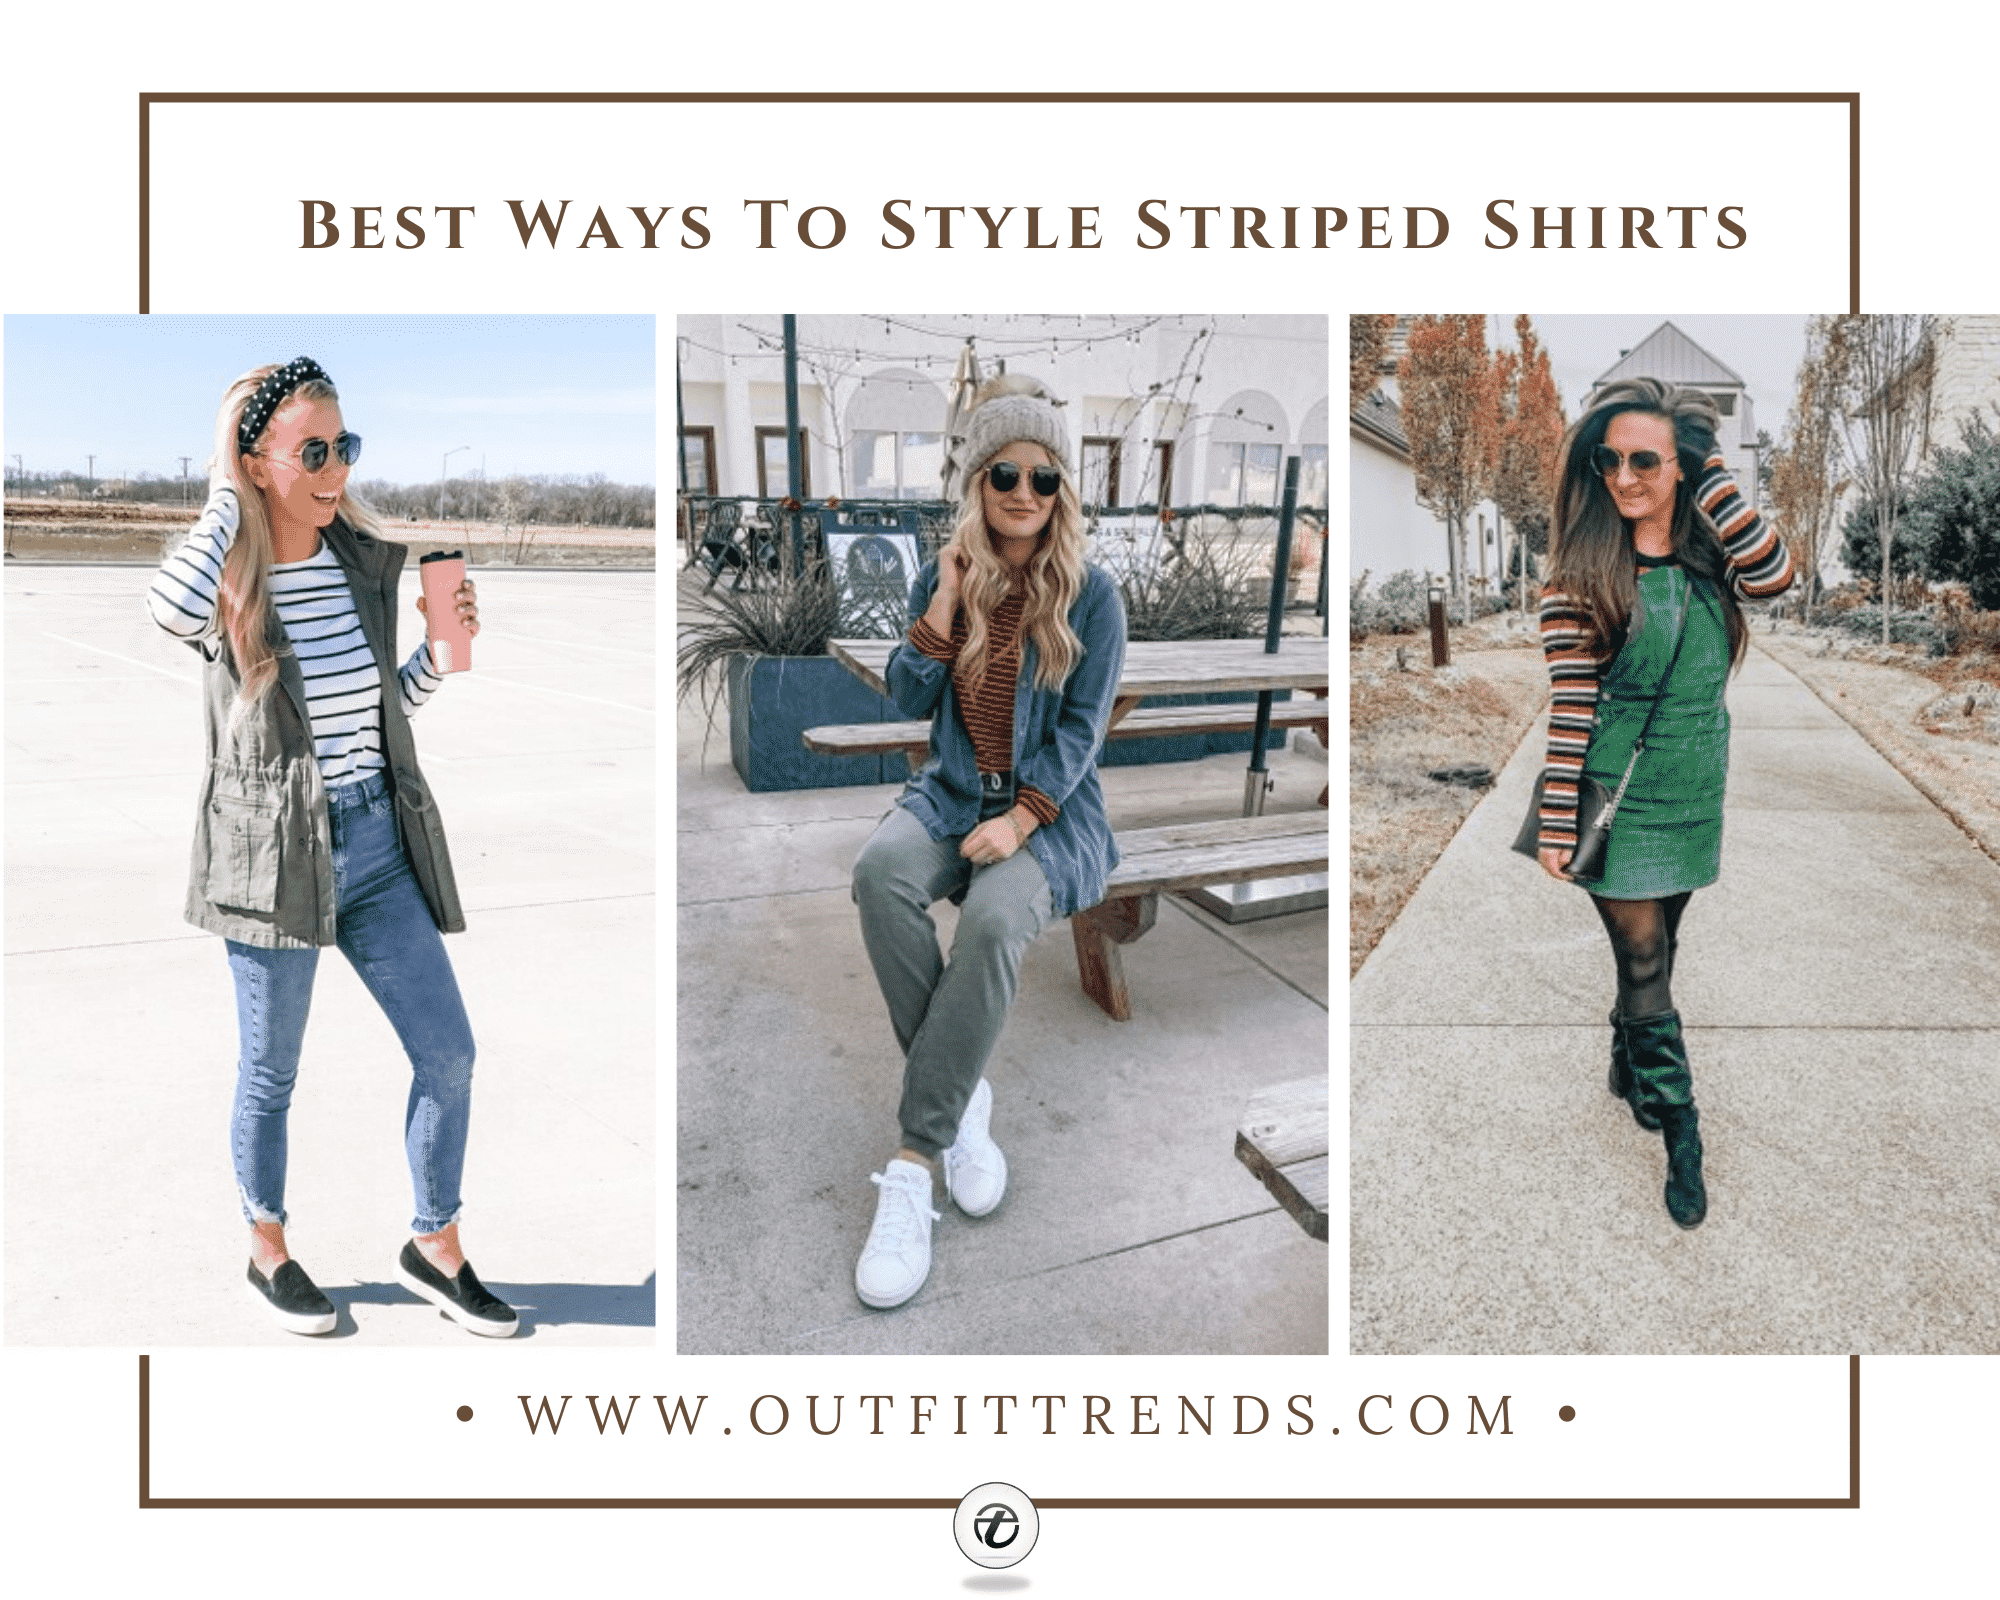 Striped Shirt Outfits - 10 Best Ways to Wear Striped Shirts